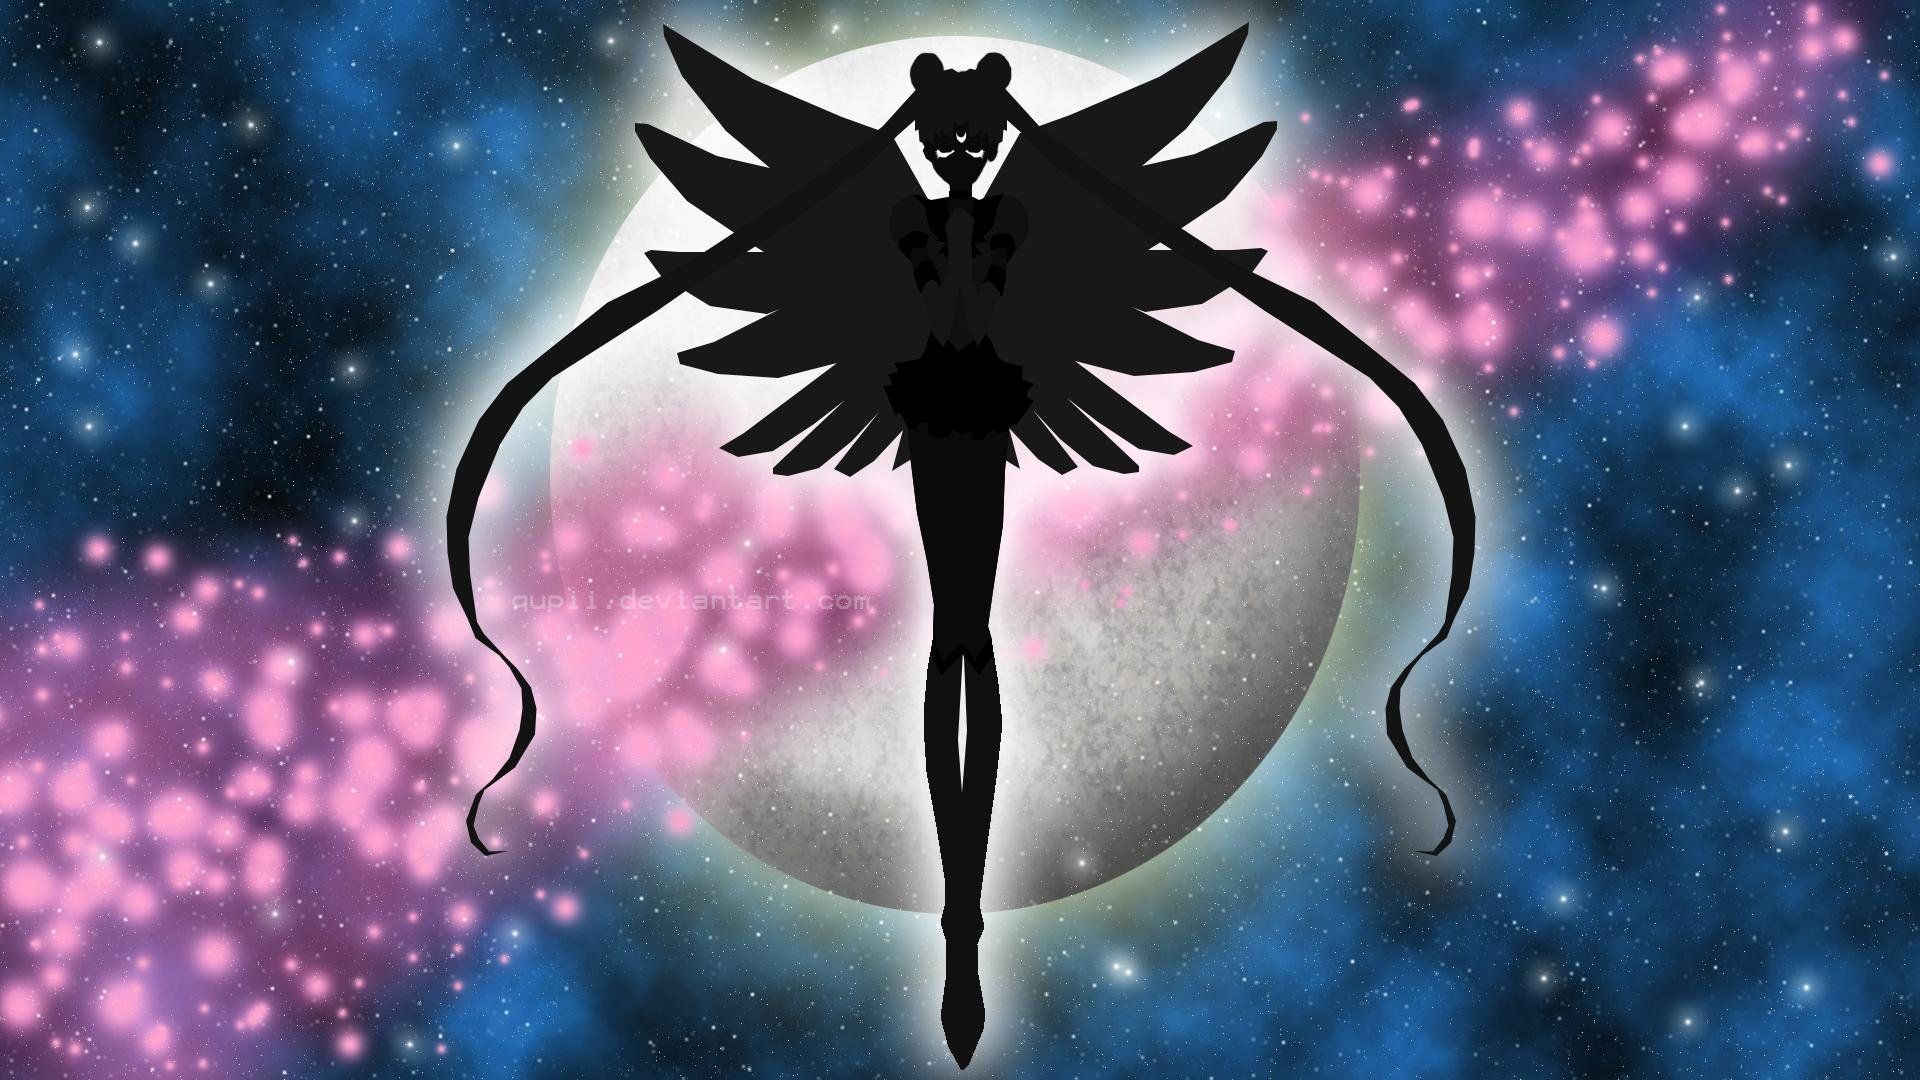 A silhouette of a fairy with wings, standing in front of a full moon - Sailor Moon